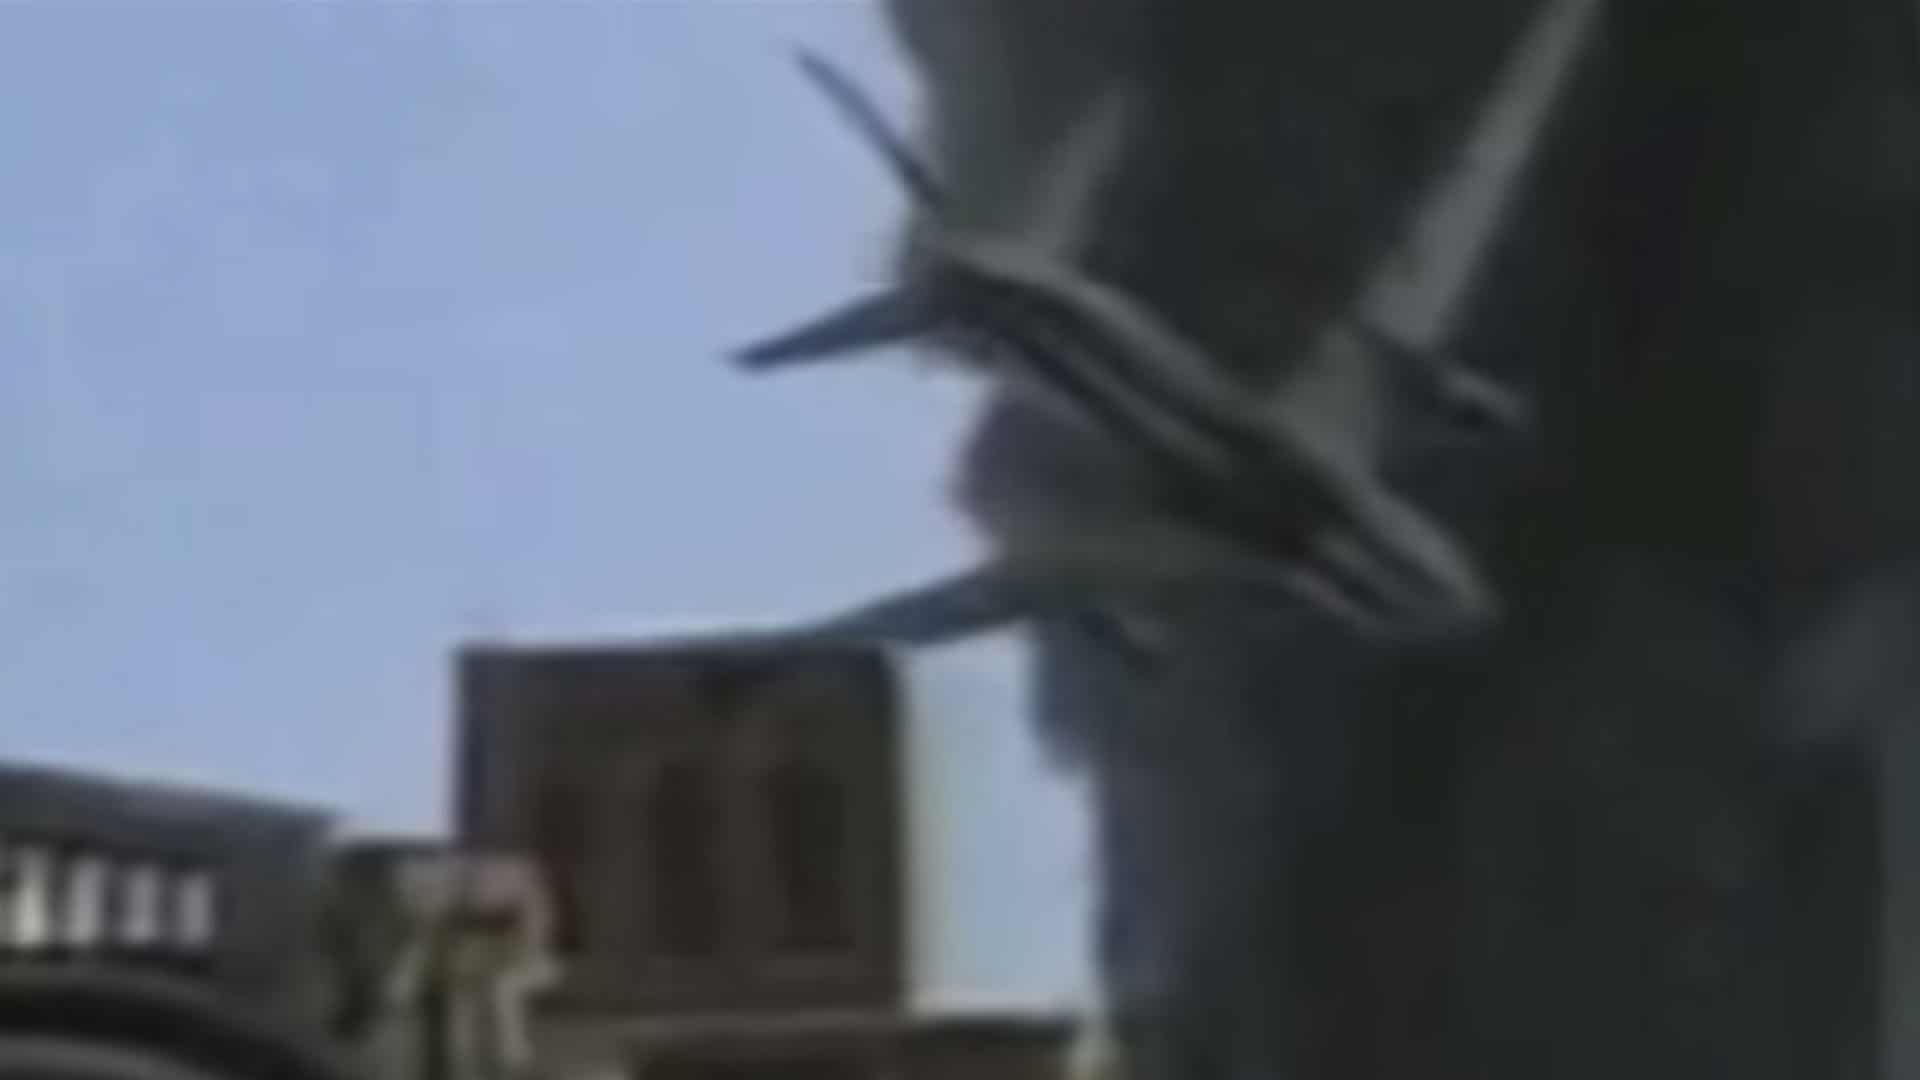 HARD PROOF IN PLAIN SIGHT THAT THE PLANES ON 9-11, WERE IN FACT, CGI!!!